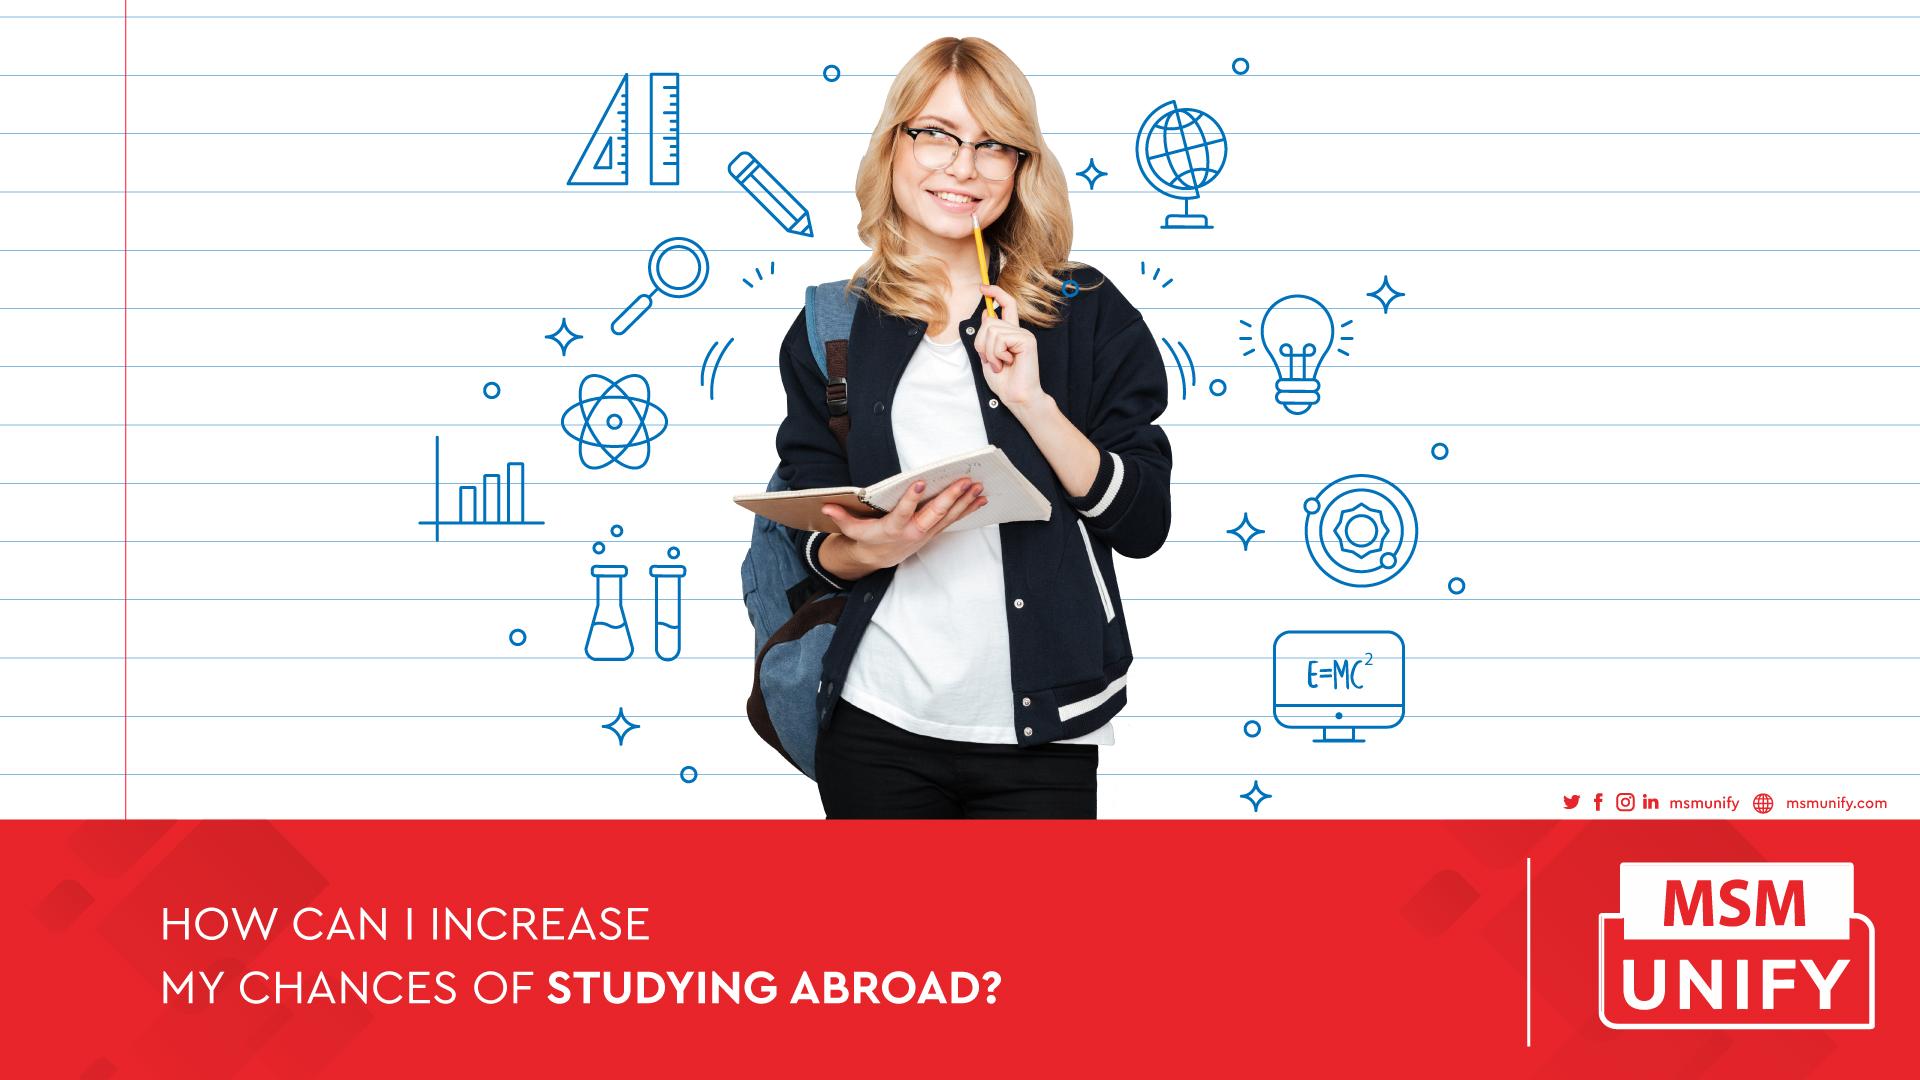 How can I increase my chances of studying abroad